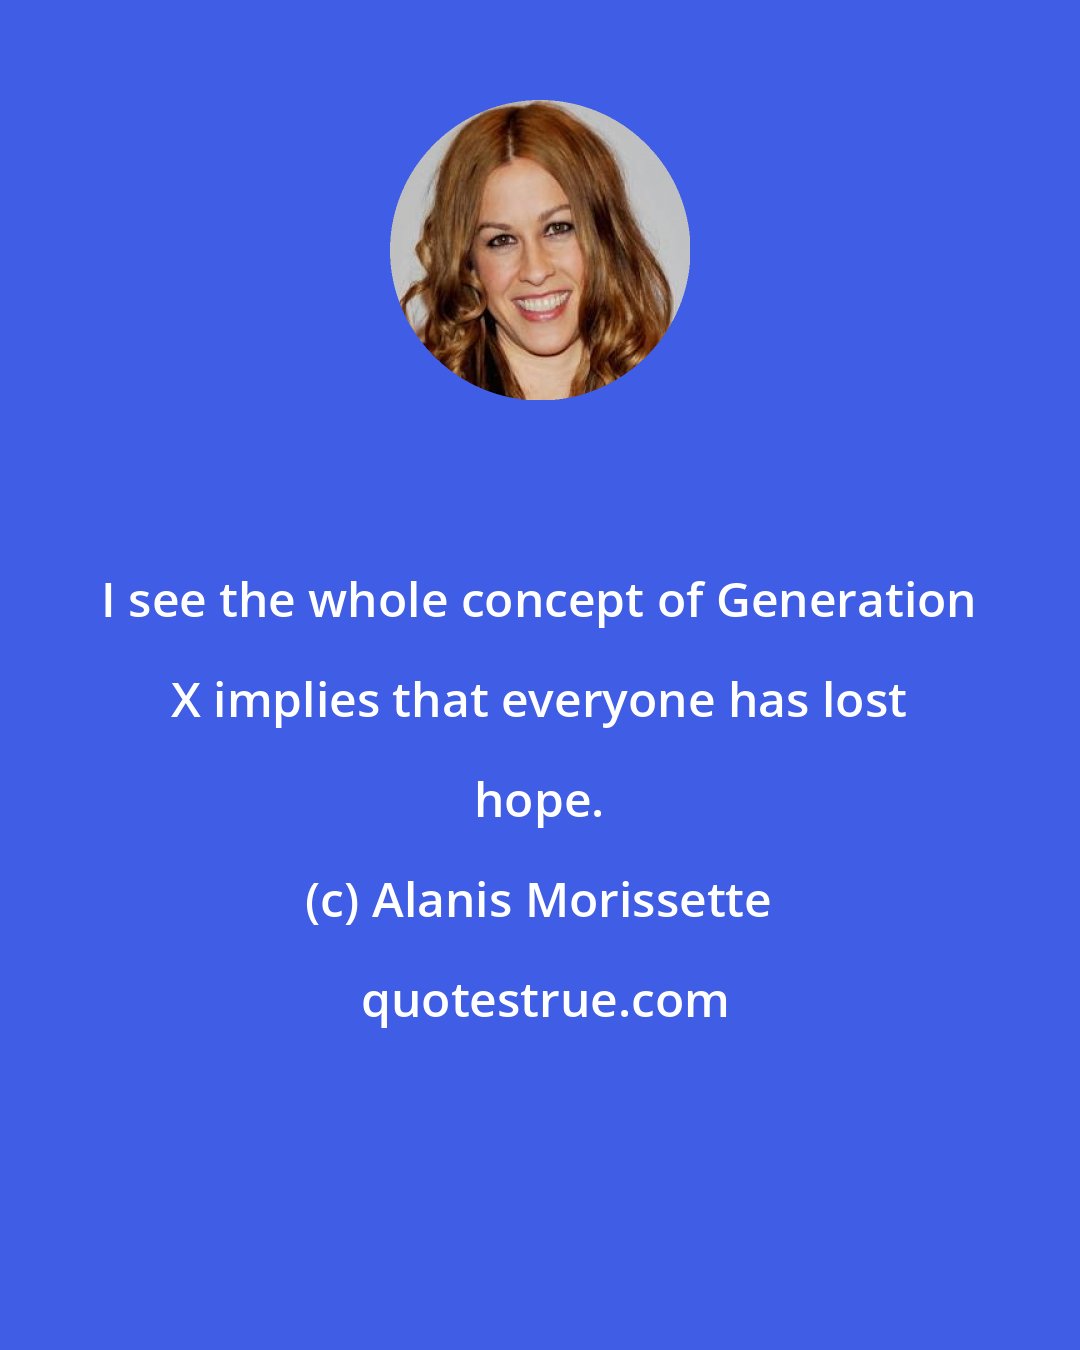 Alanis Morissette: I see the whole concept of Generation X implies that everyone has lost hope.